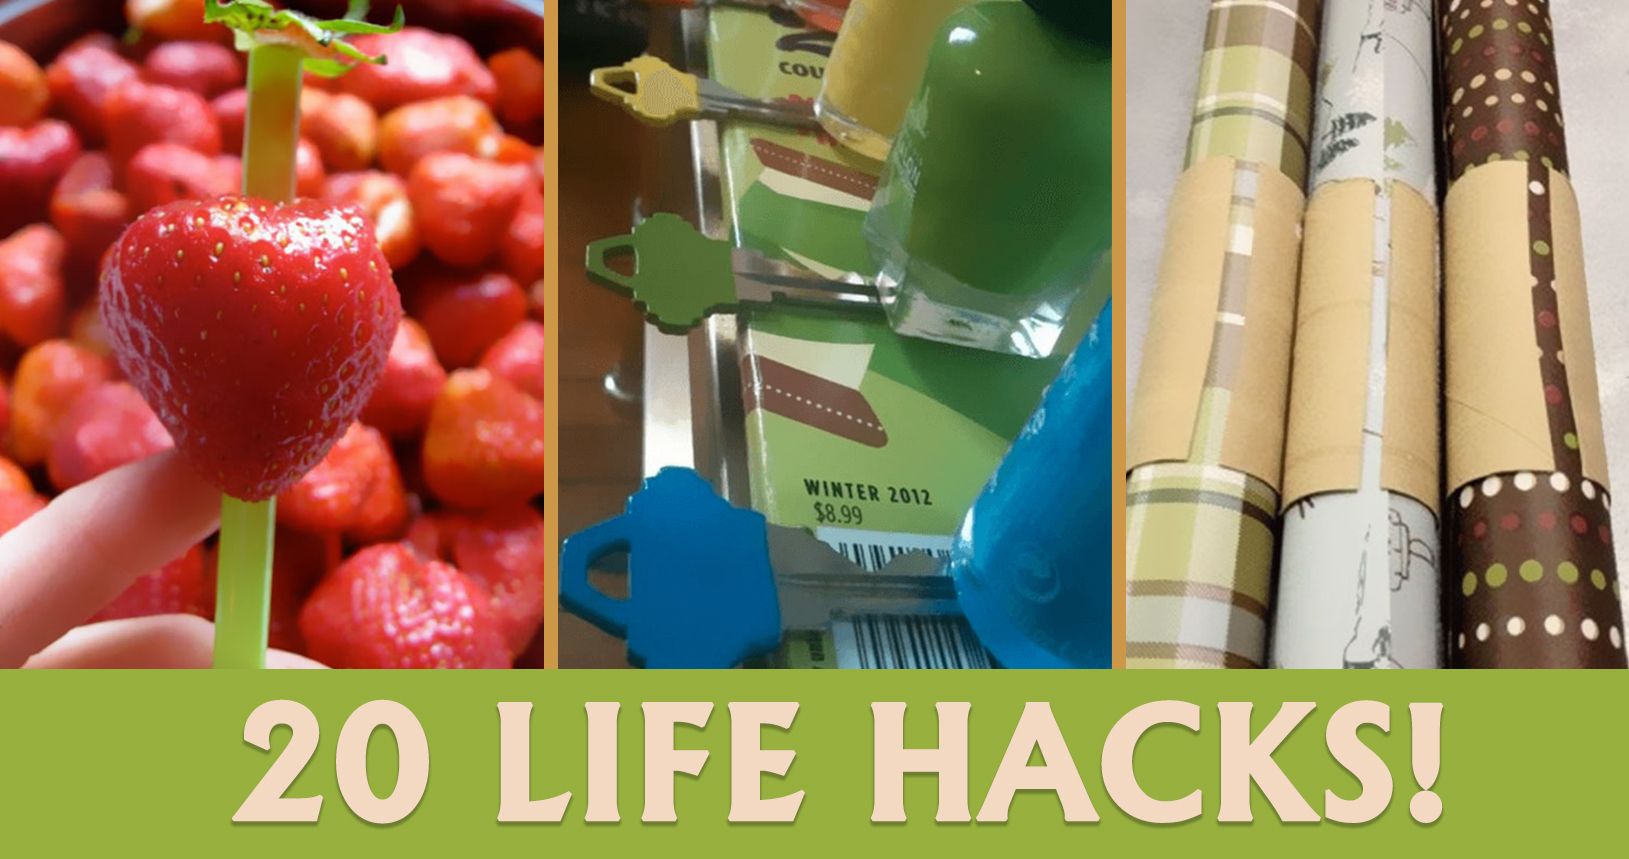 20 Life Hacks That Will Make Your Life Easier!